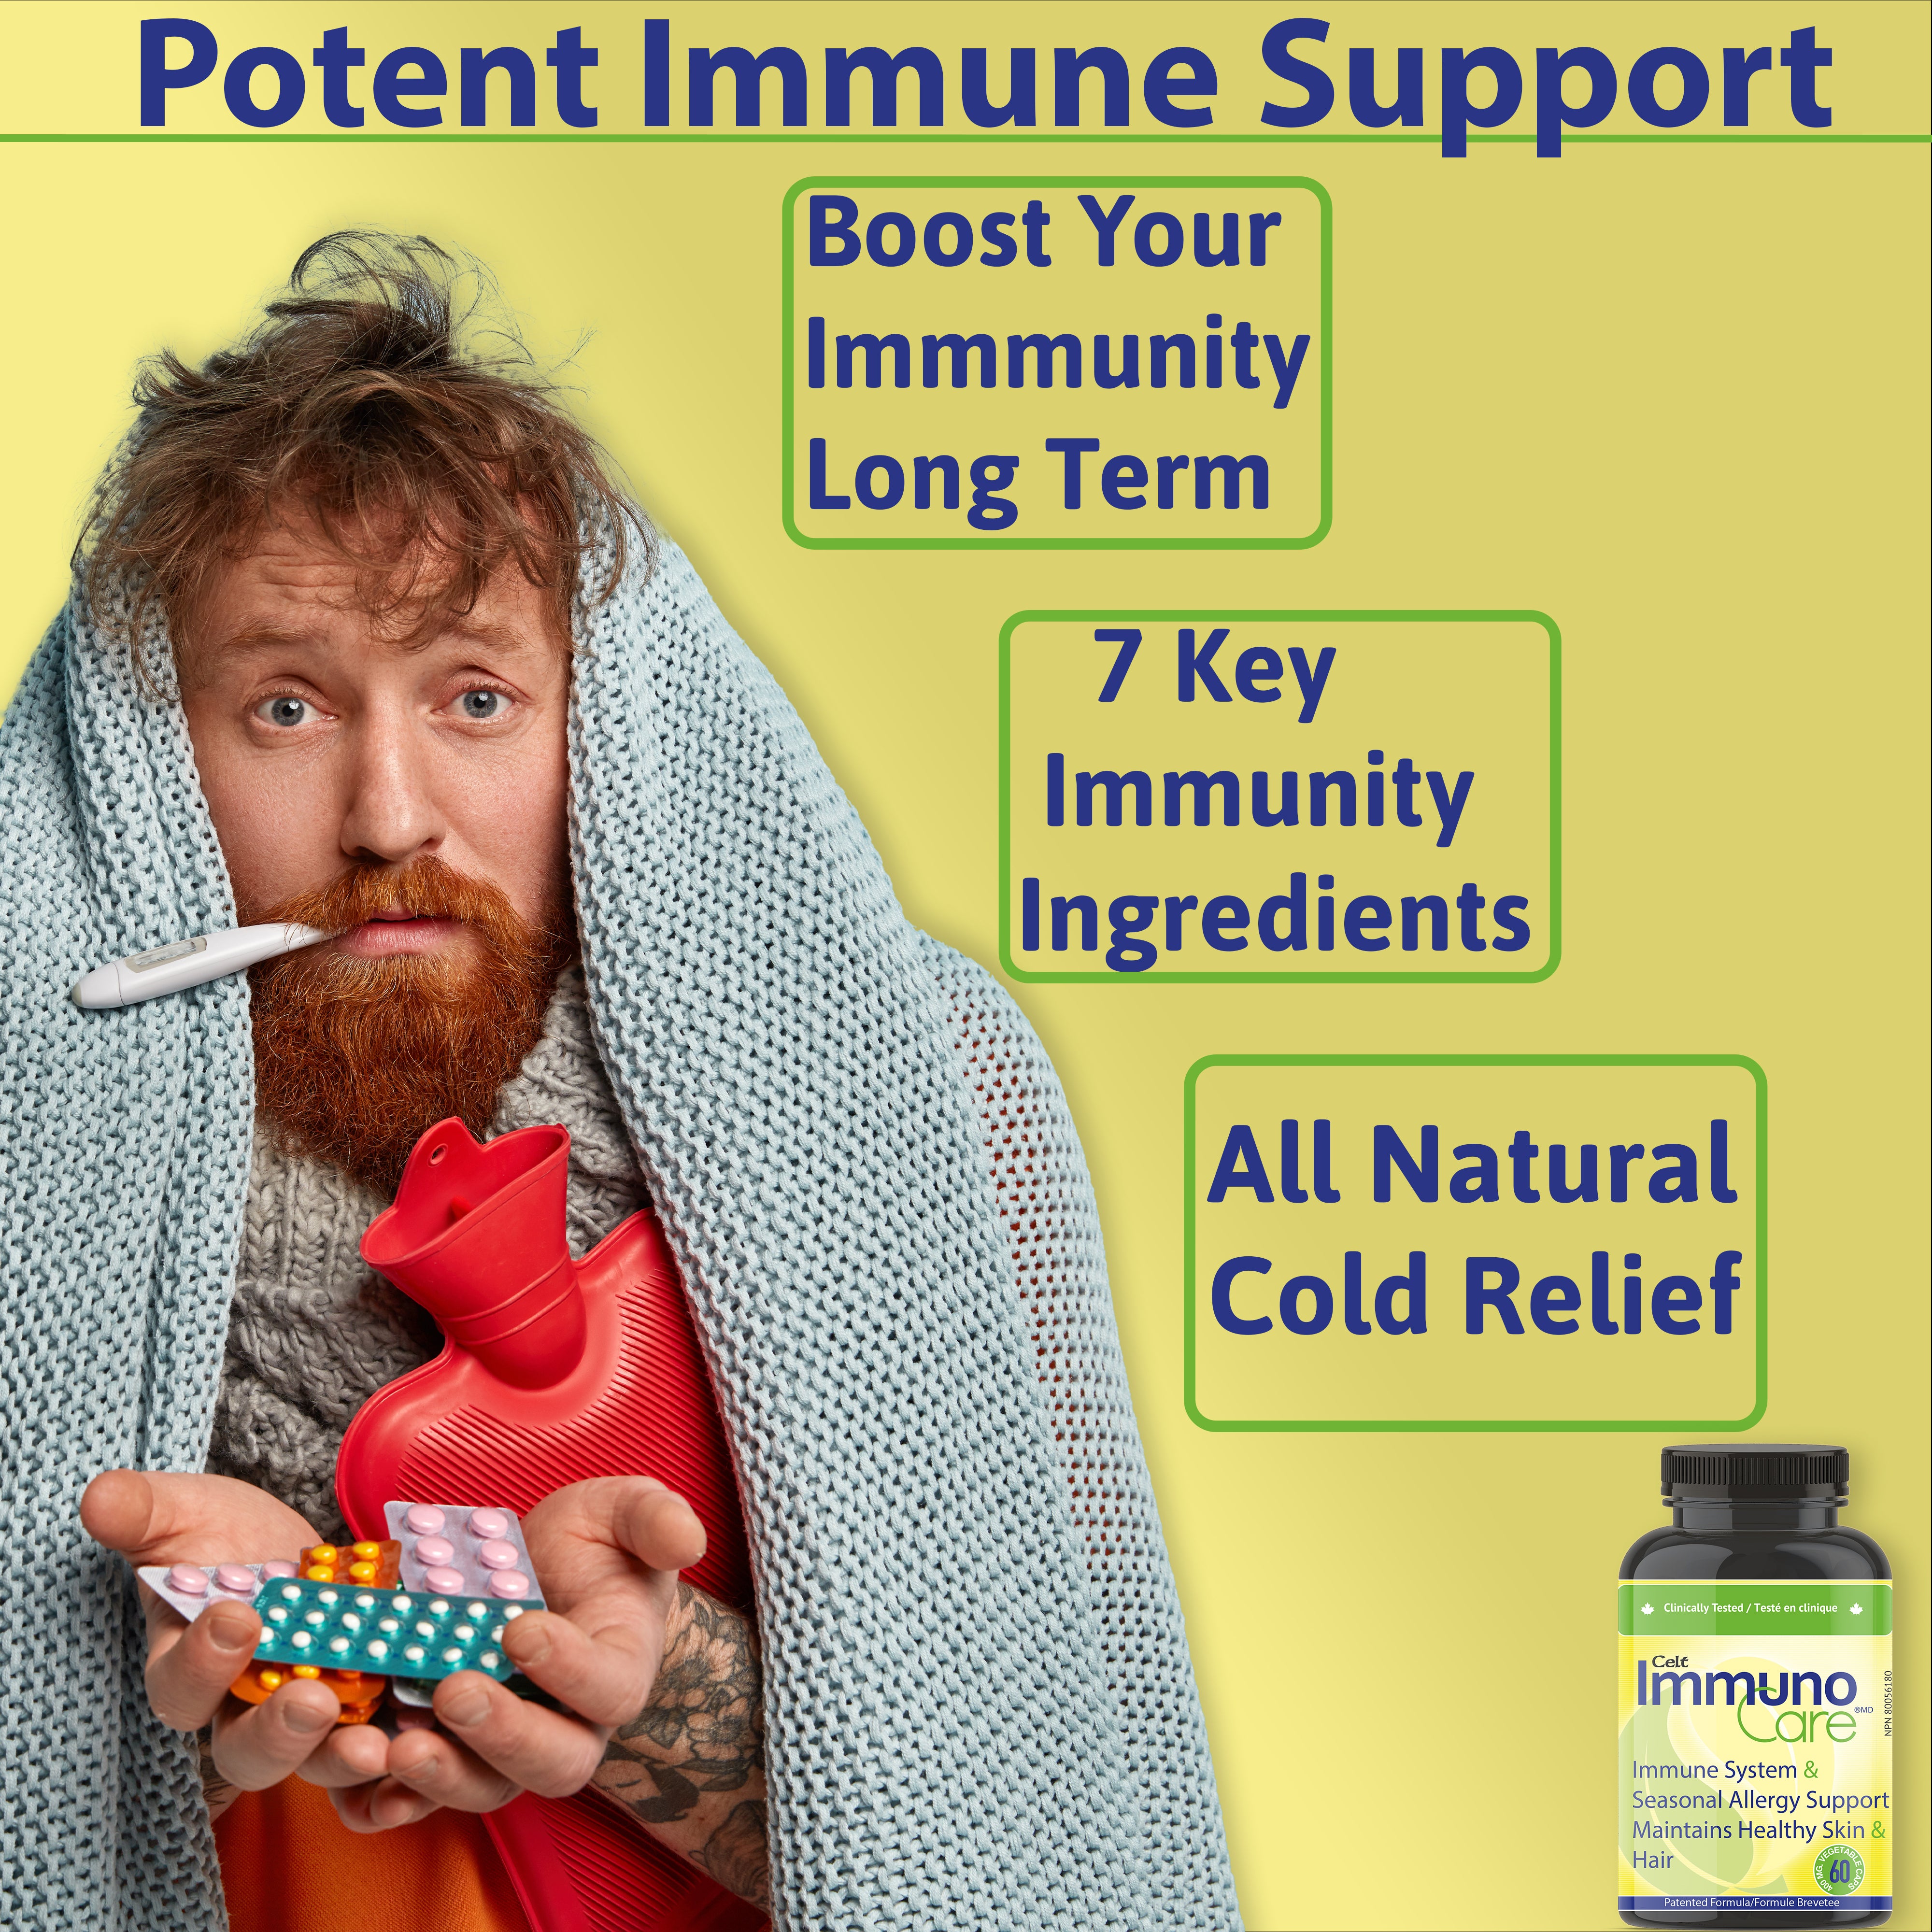 Man holding medicine and having blanket around him he has a cold.  all natural cold relief, Boost your immunity, natural Immunity Supplement.